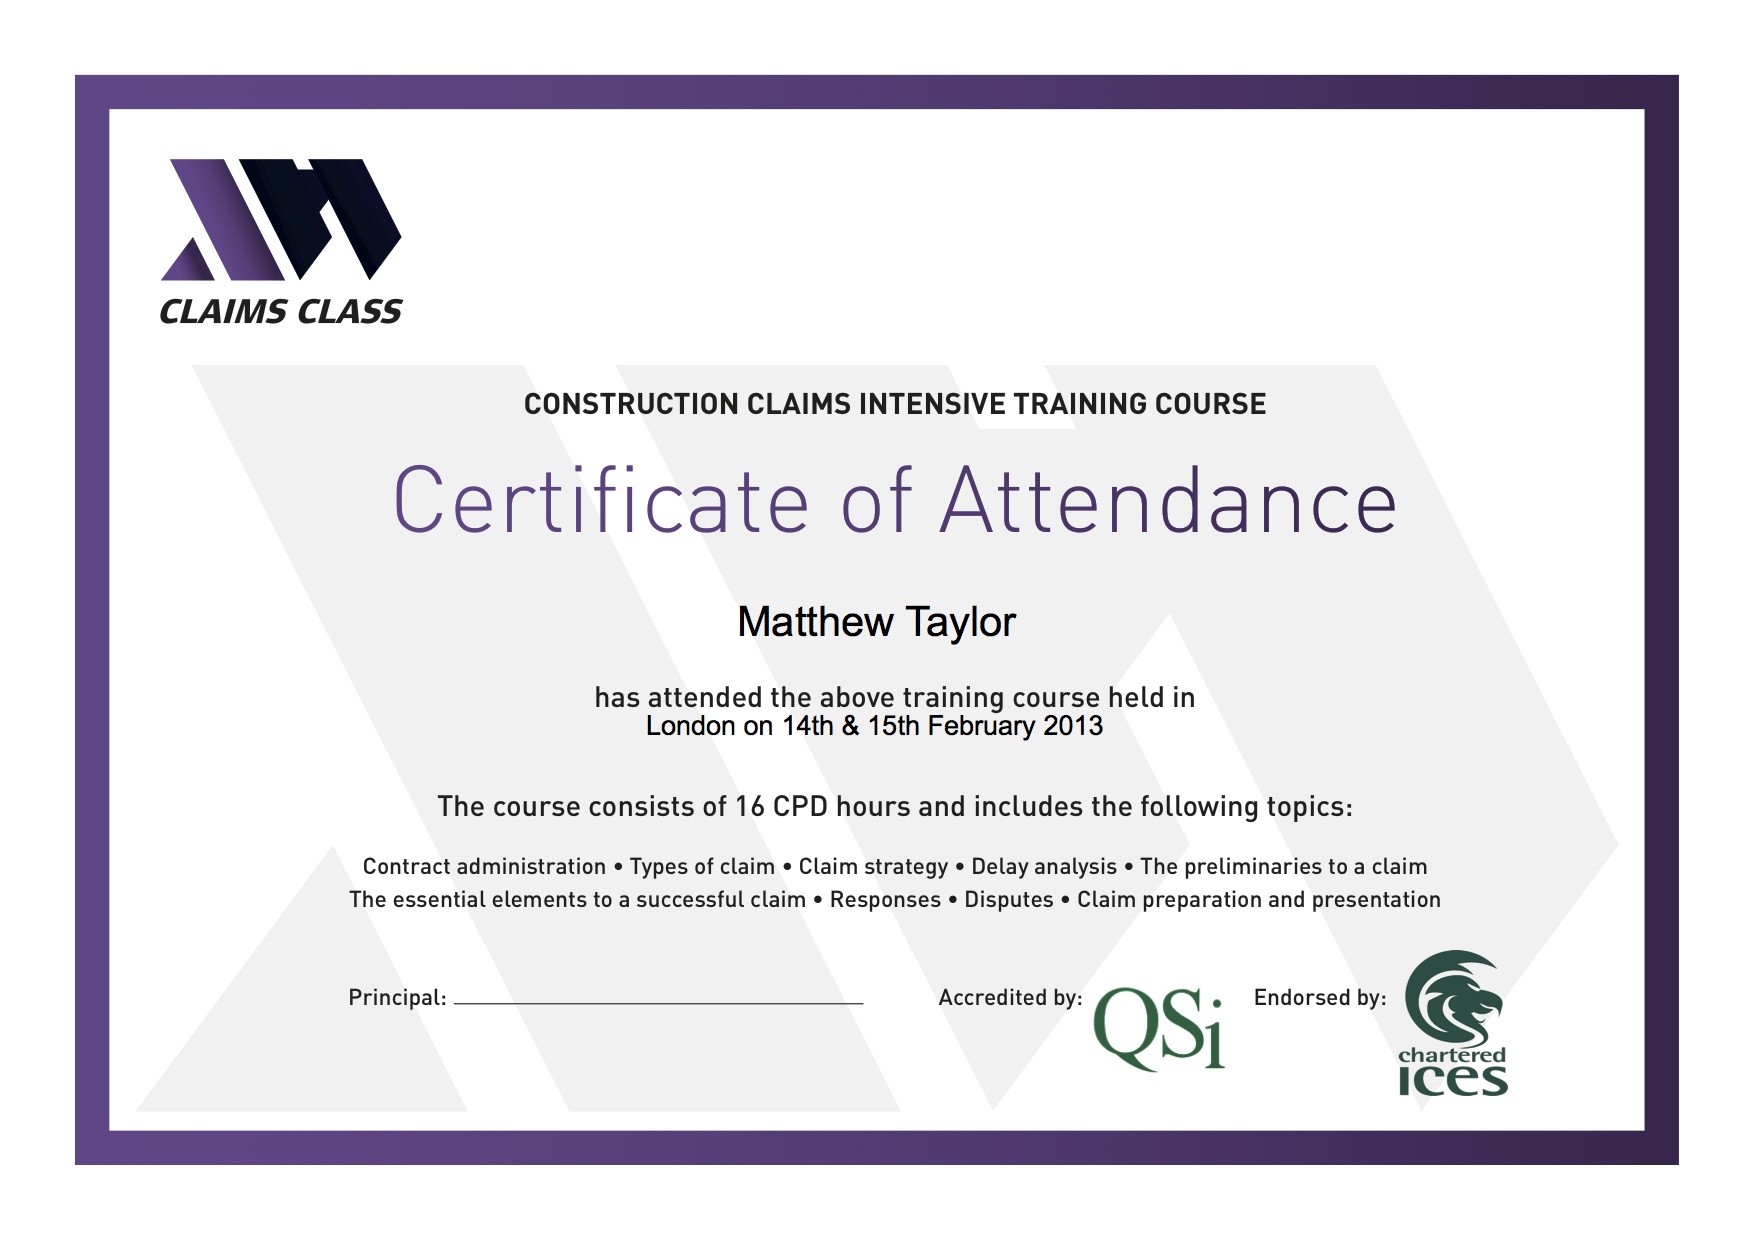 Certificate of Attendance Templates %site title%